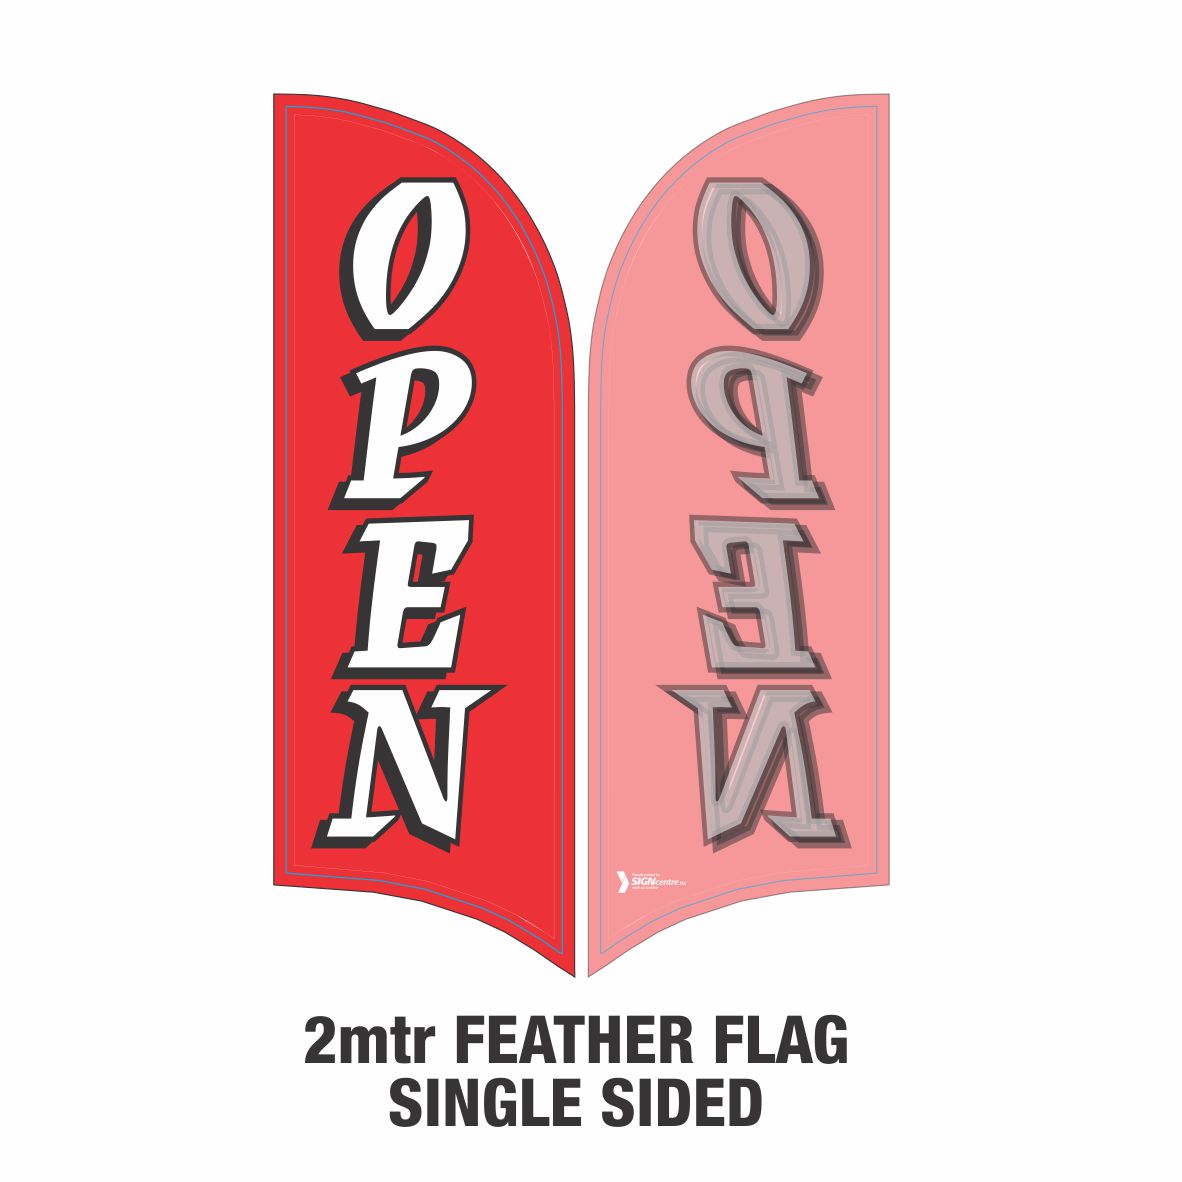 OPEN-FEATHER-FLAG-BANNER-2MTR-SINGLE-SIDED